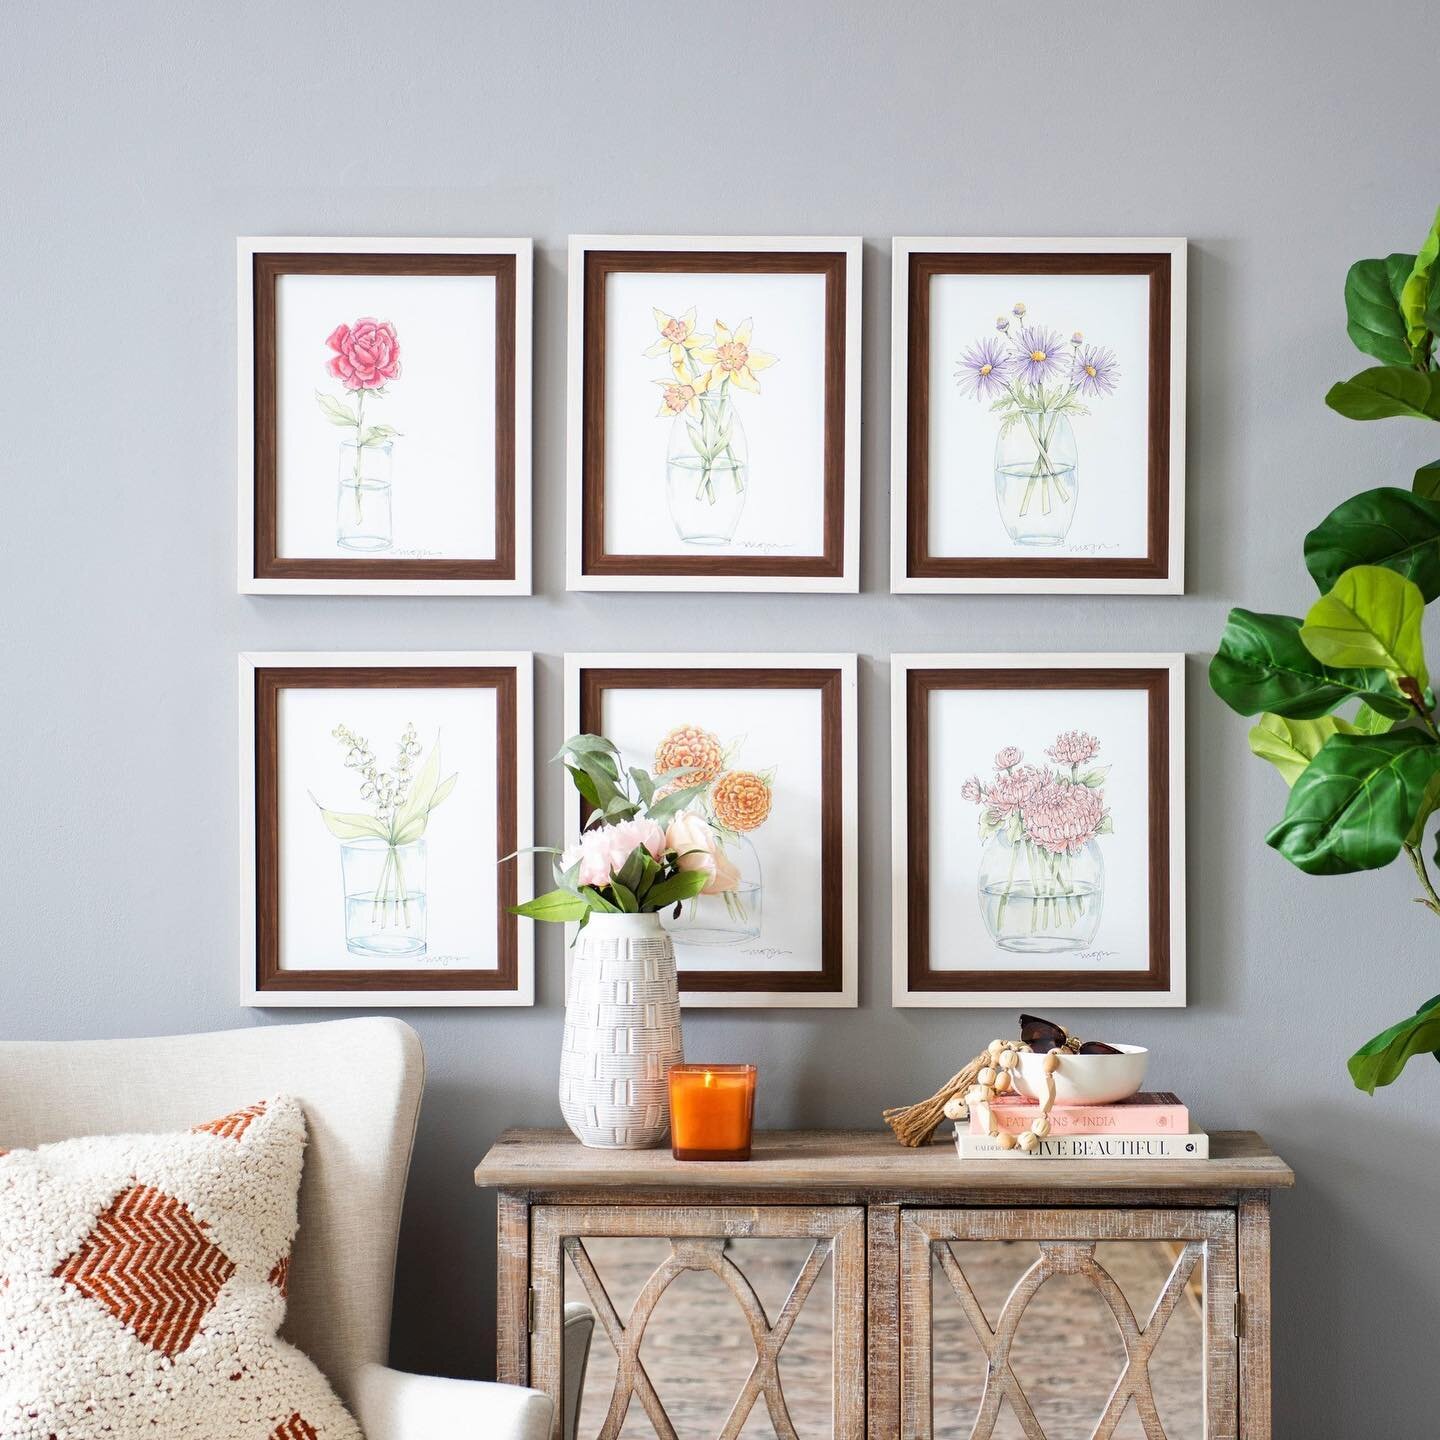 Have you seen these new art prints from Morgan Harrington? 👀 Each print features a different birth month flower and a walnut interior frame finish. P.S. These are the perfect gift idea for mom if you're in need of a last minute gift! 🎁	
.
#kirkland